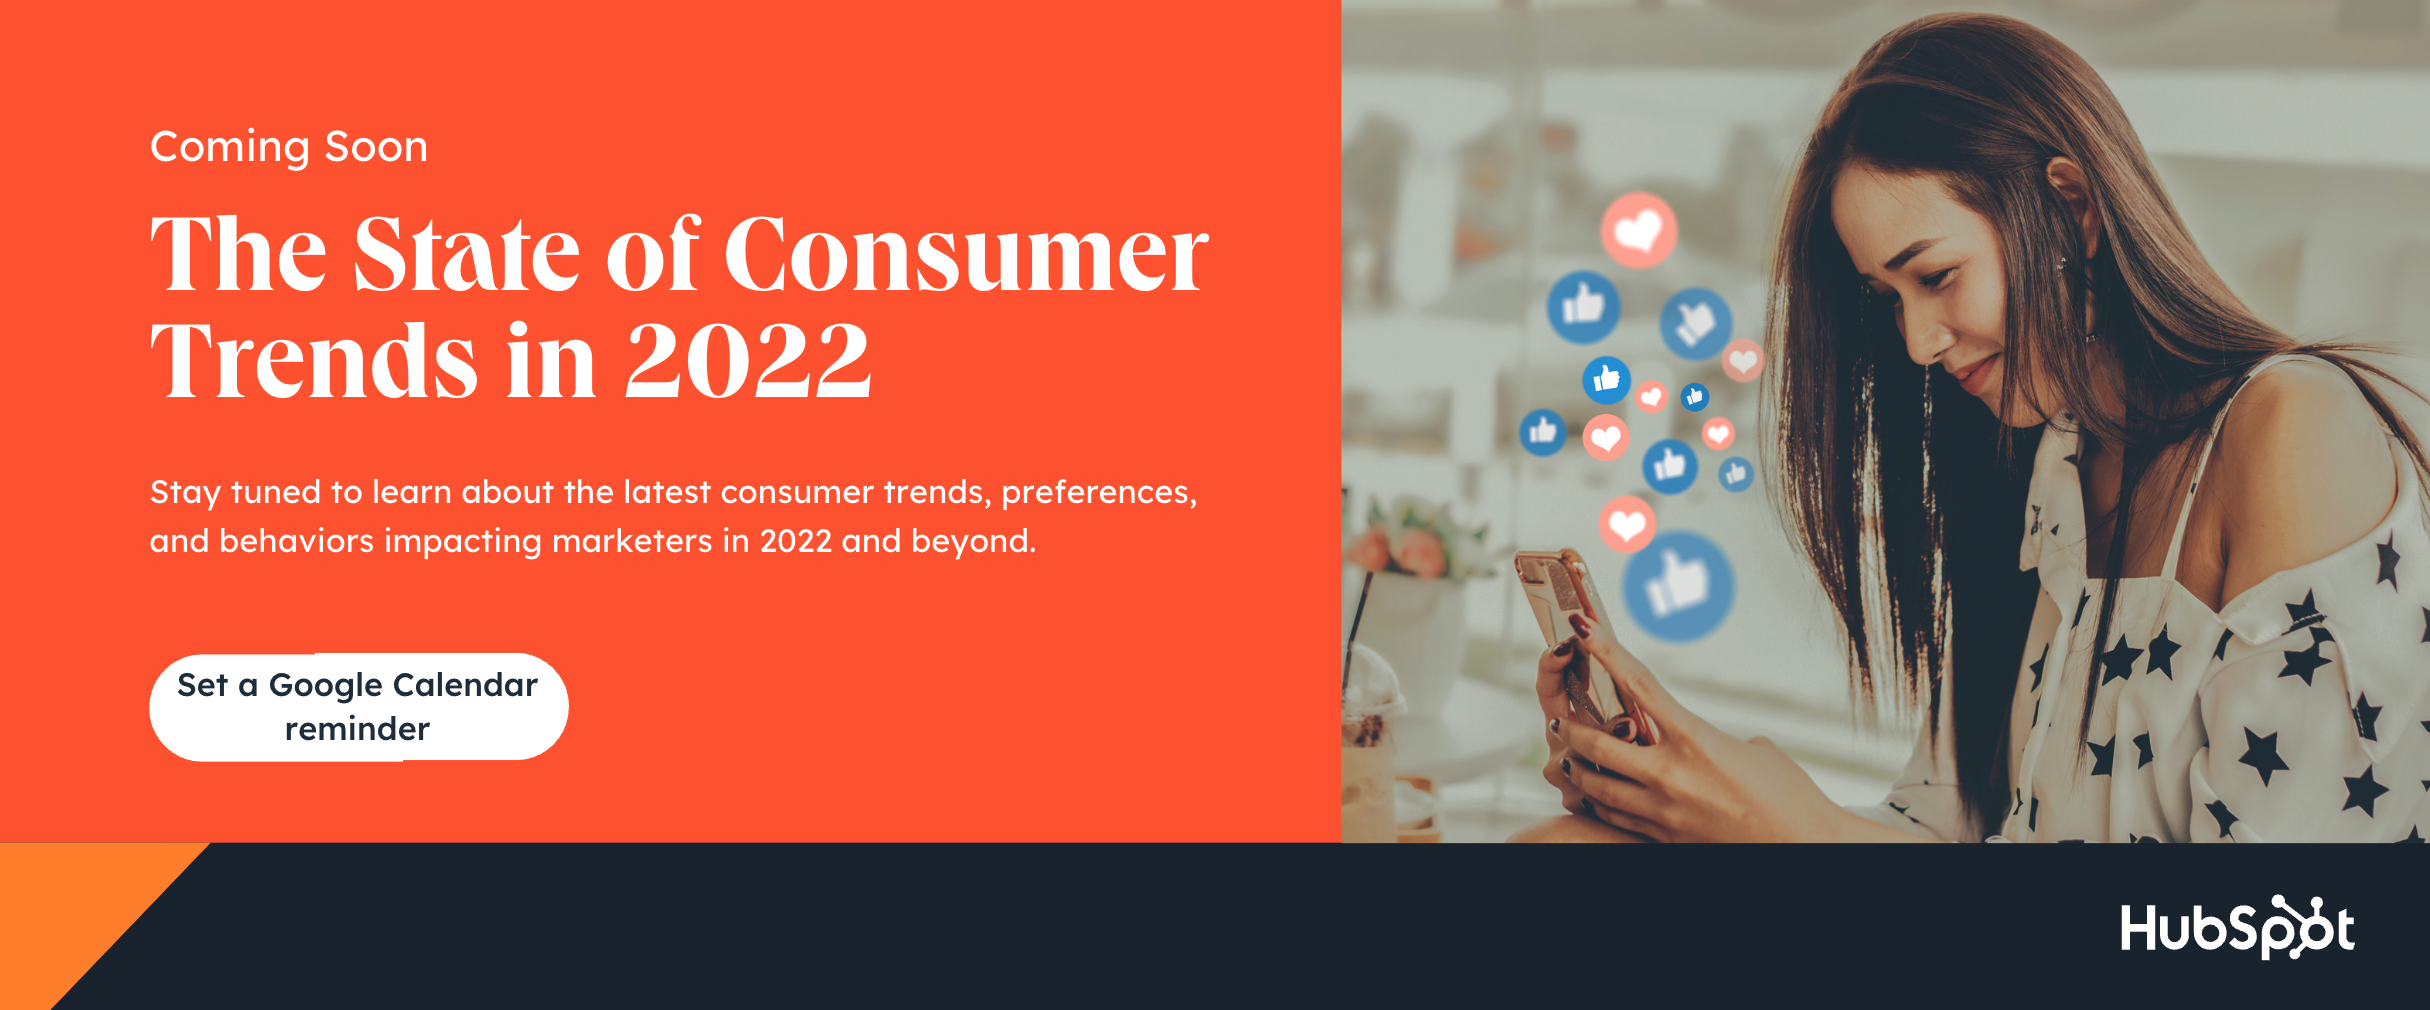 Click to set a Google Calendar reminder to read our state of consumer trends report and content on this page